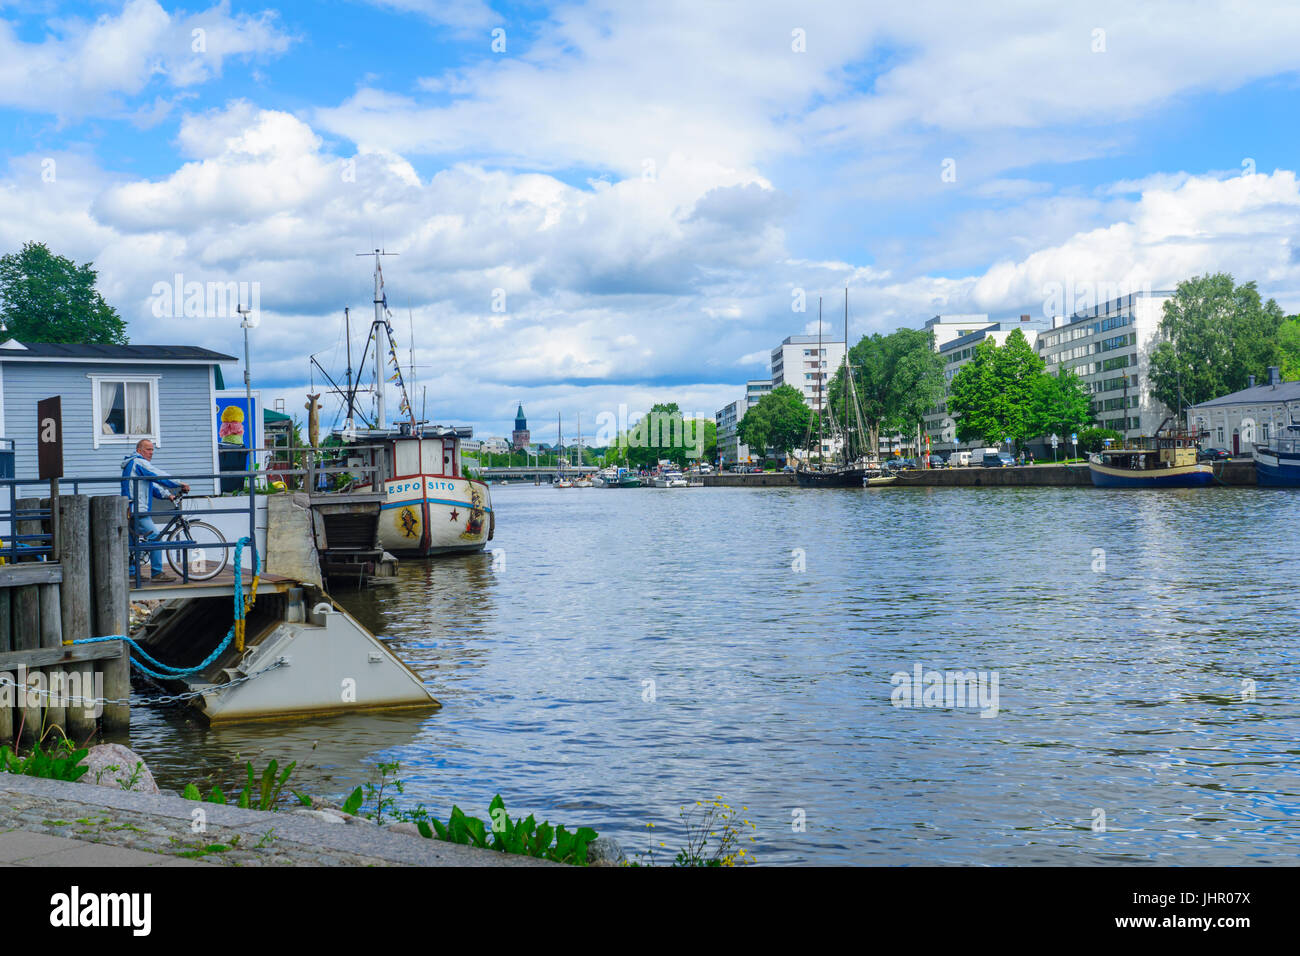 TURKU, FINLAND - JUNE 23, 2017: Scene of the Aura river, with a man waiting for the Fori ferry, in Turku, Finland Stock Photo